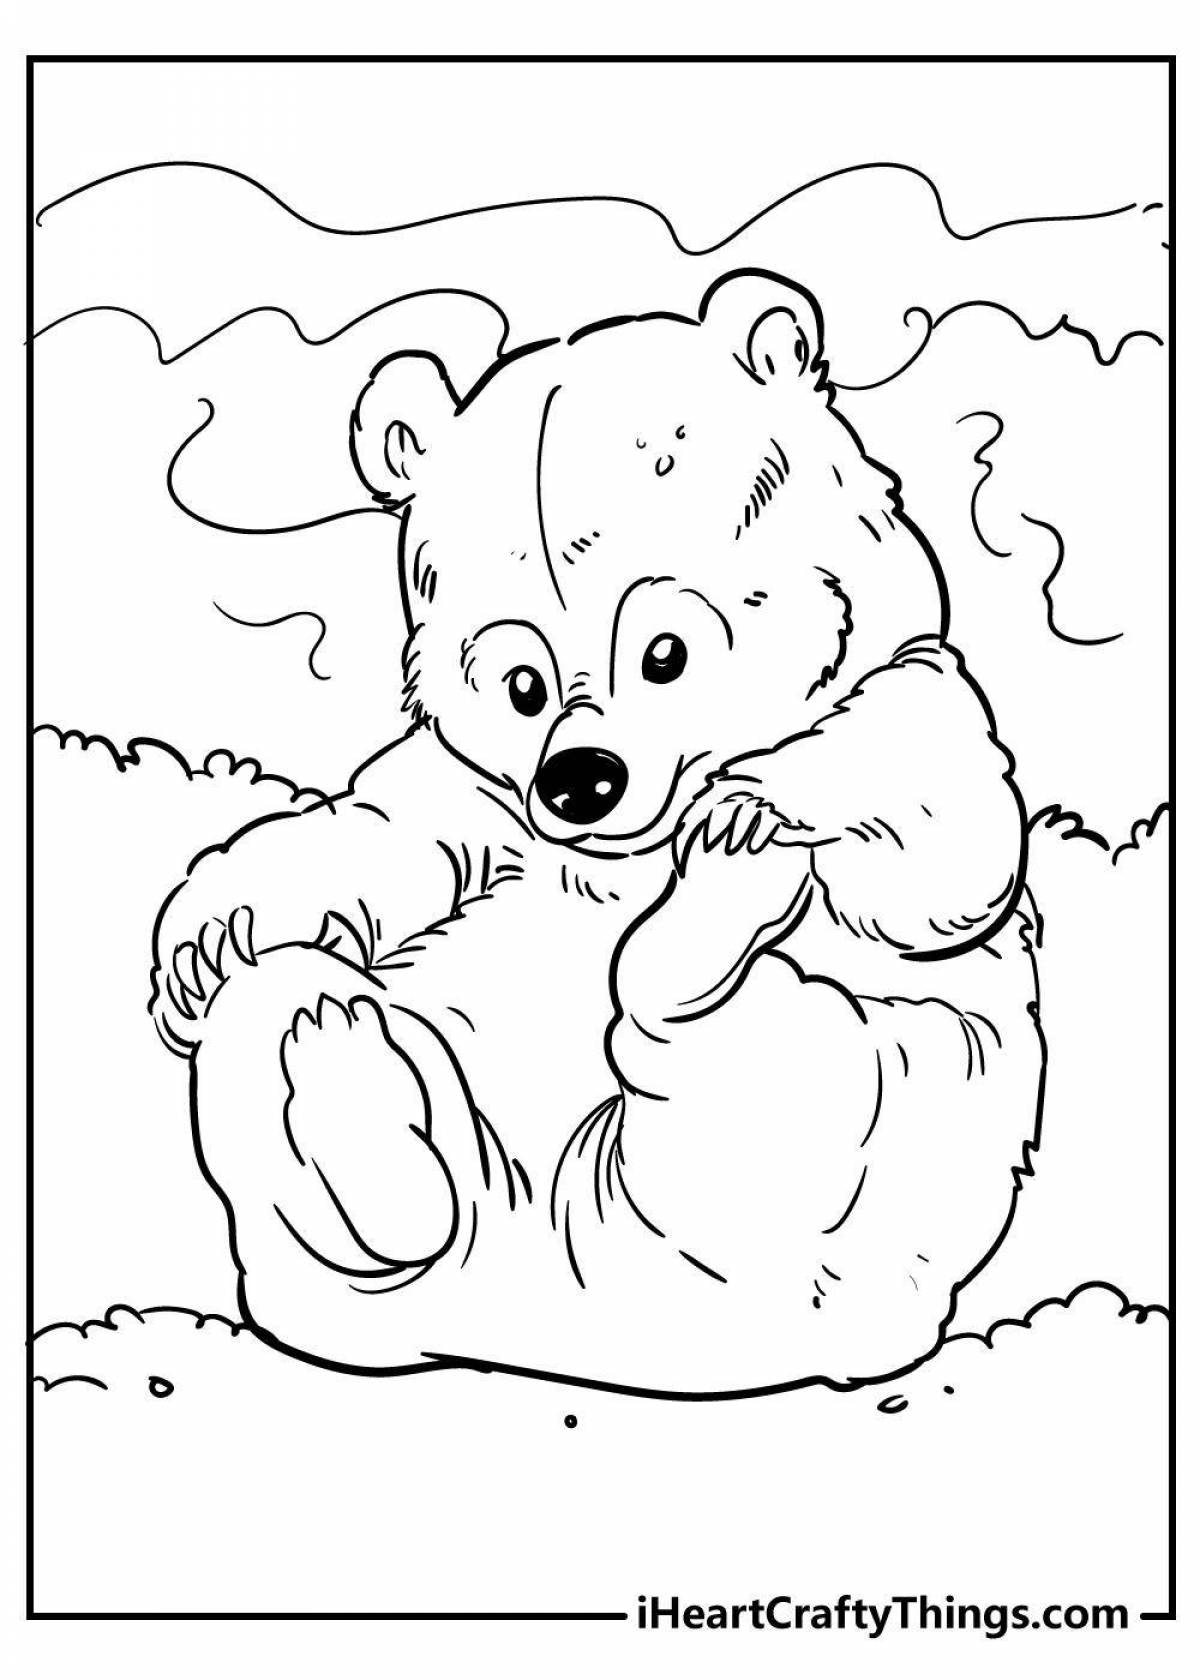 Coloring book hugging bear in the north